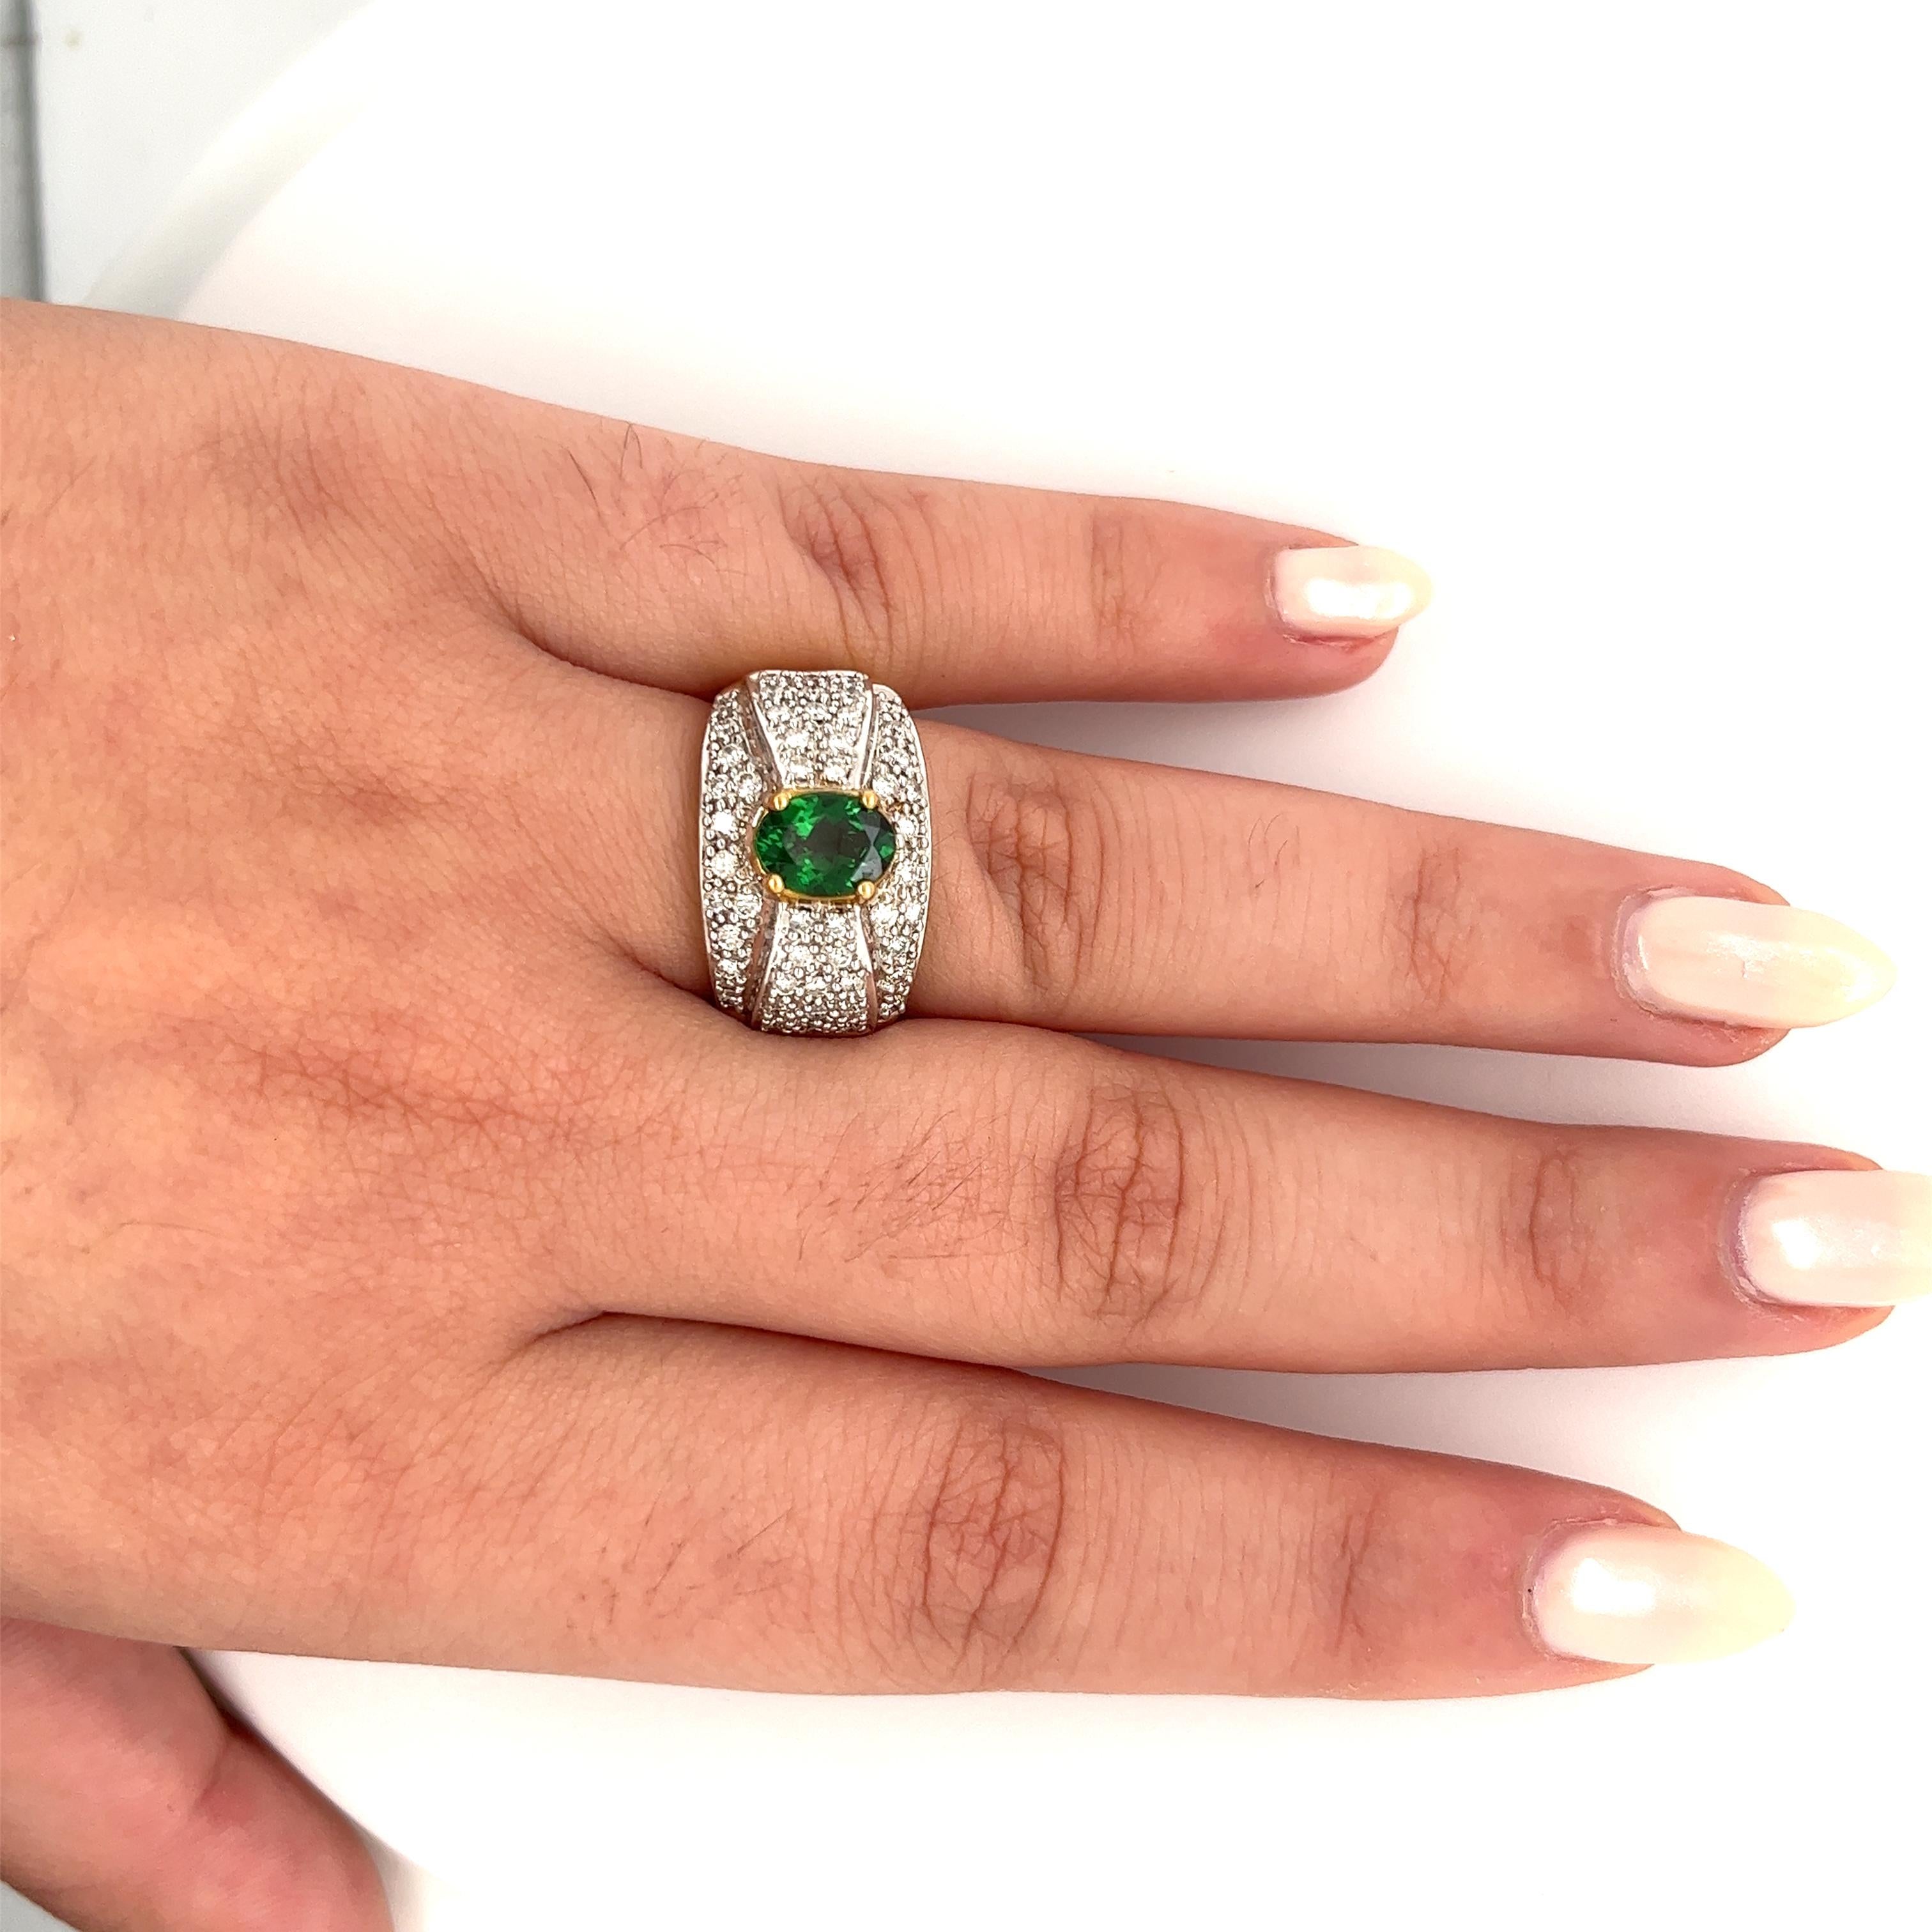 Vintage tsavorite and diamond cluster ring in 18k solid gold. Featuring a richly colored oval cut green and round cut diamond side stones. Mounting in a two-toned solid gold setting.

Tsavorite is a rare form of Garnet called Green